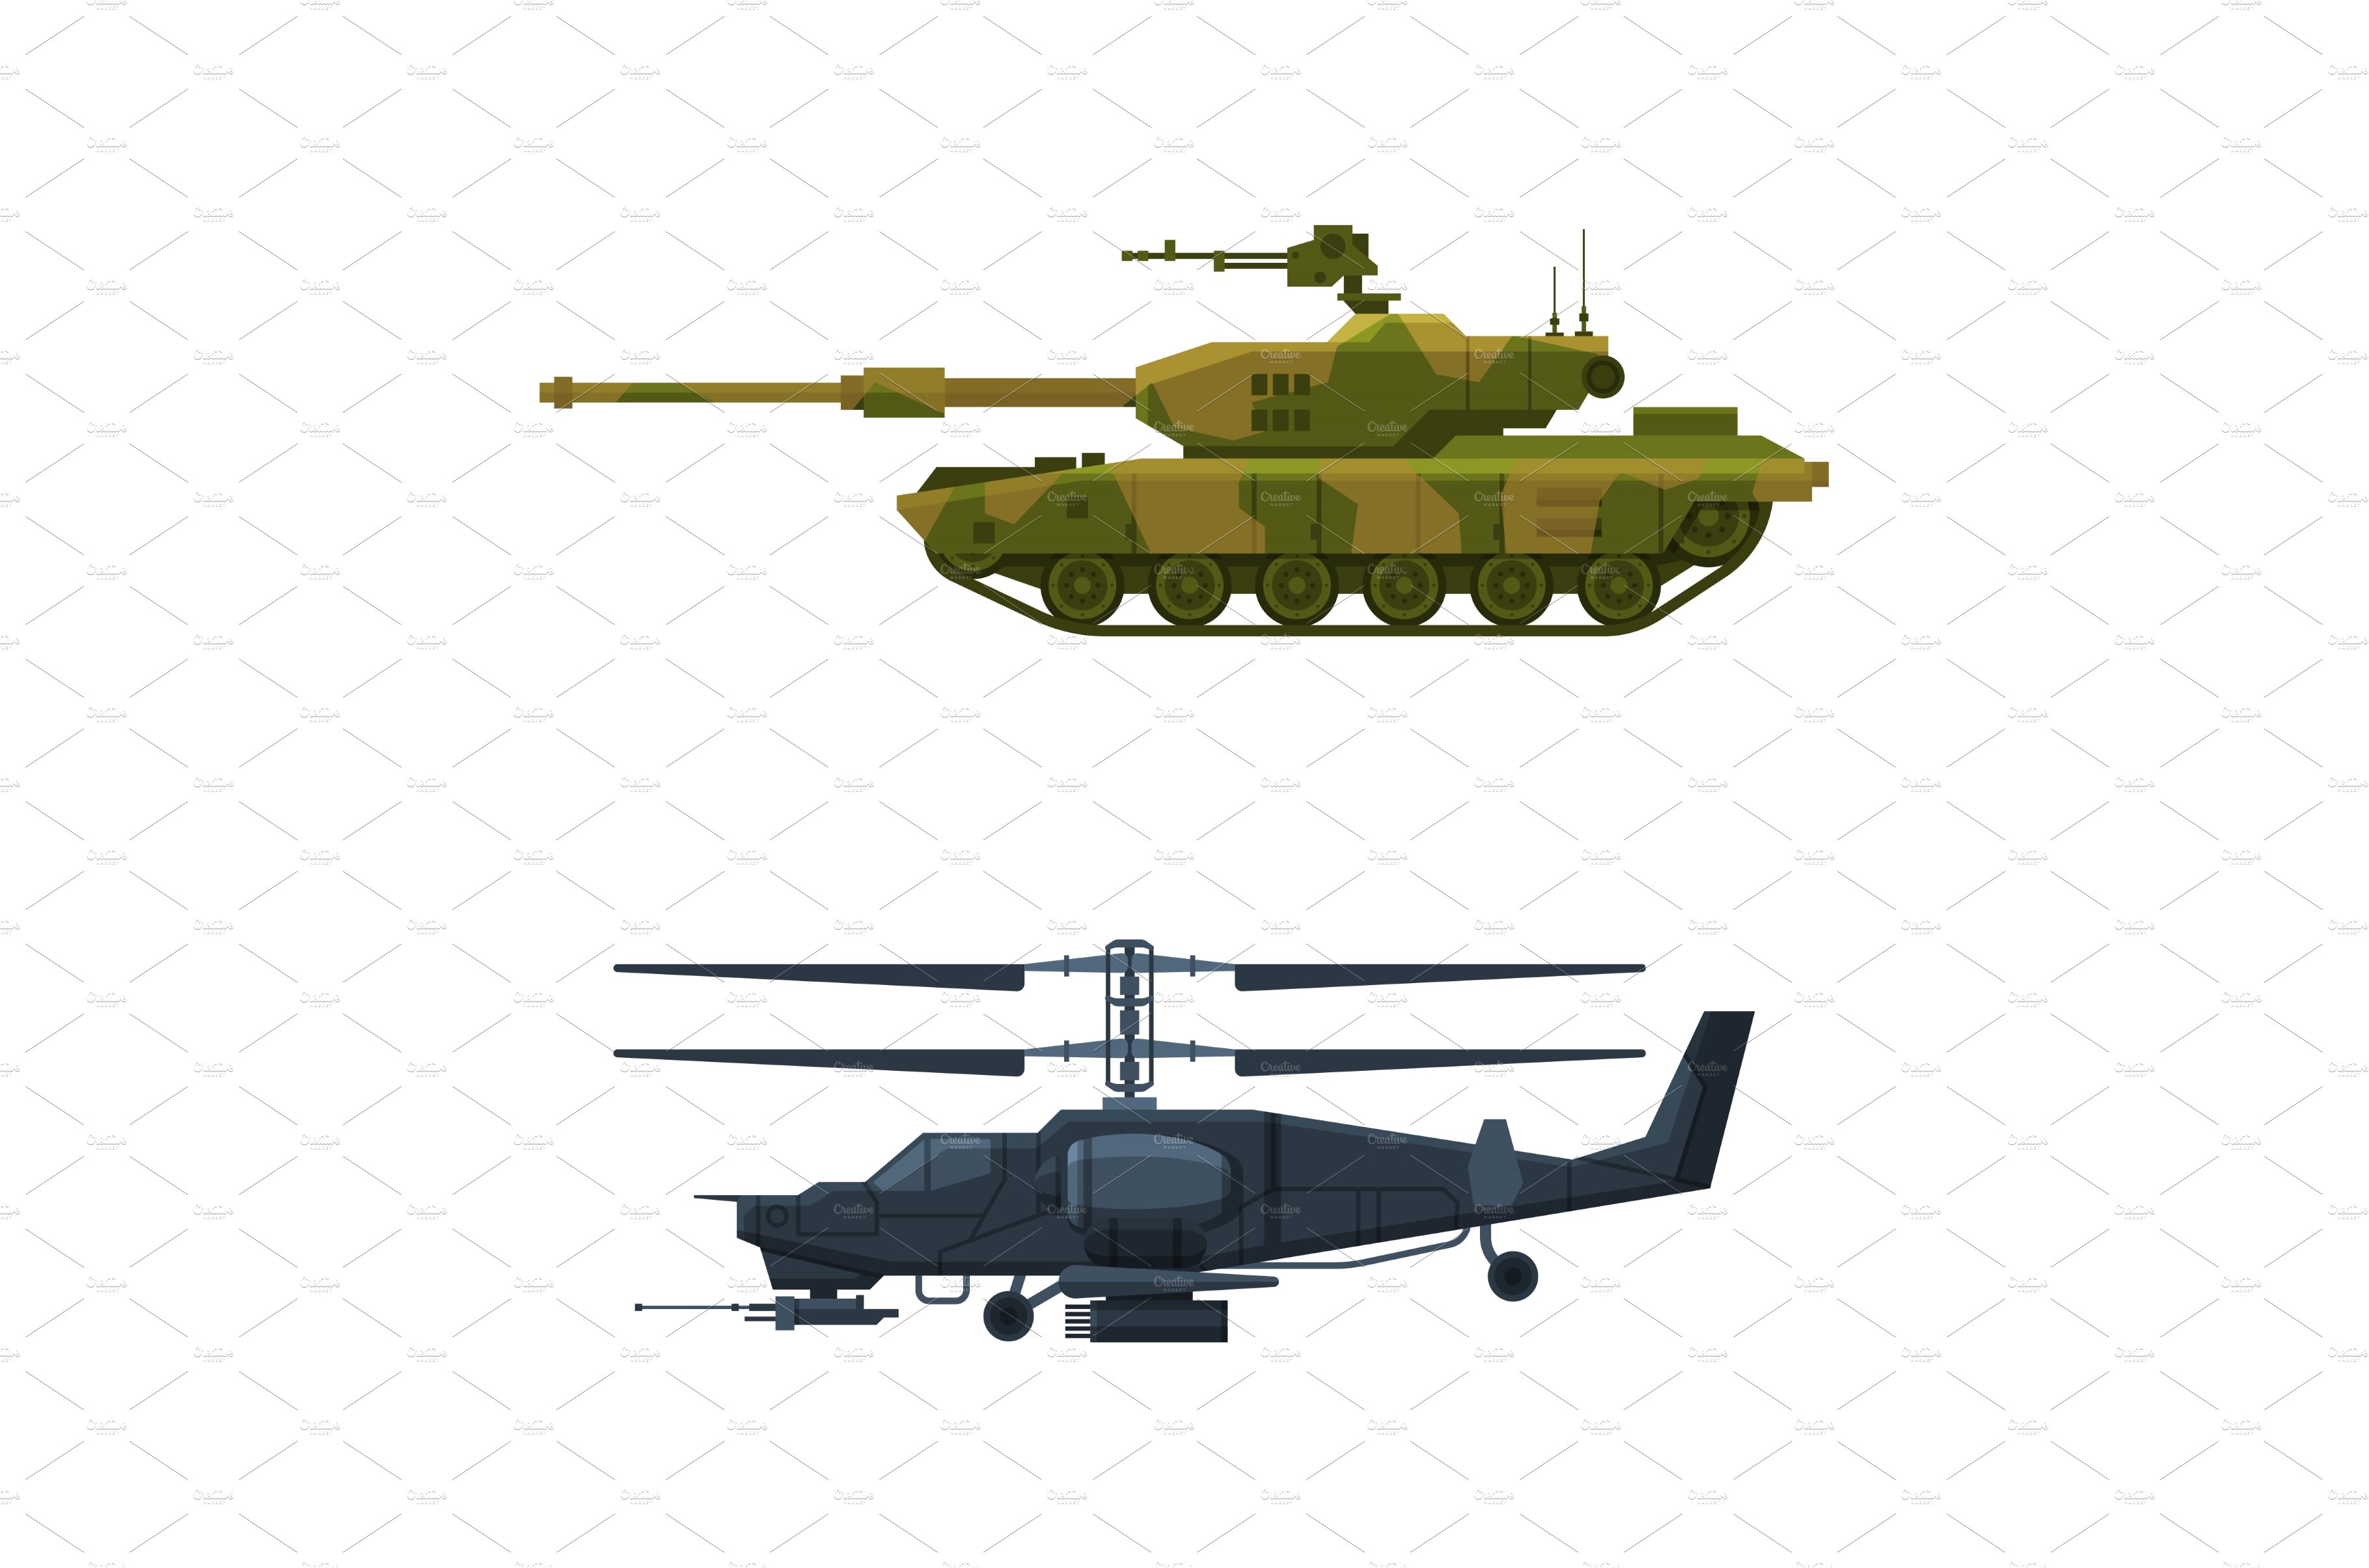 Tank and Helicopter as Armored cover image.